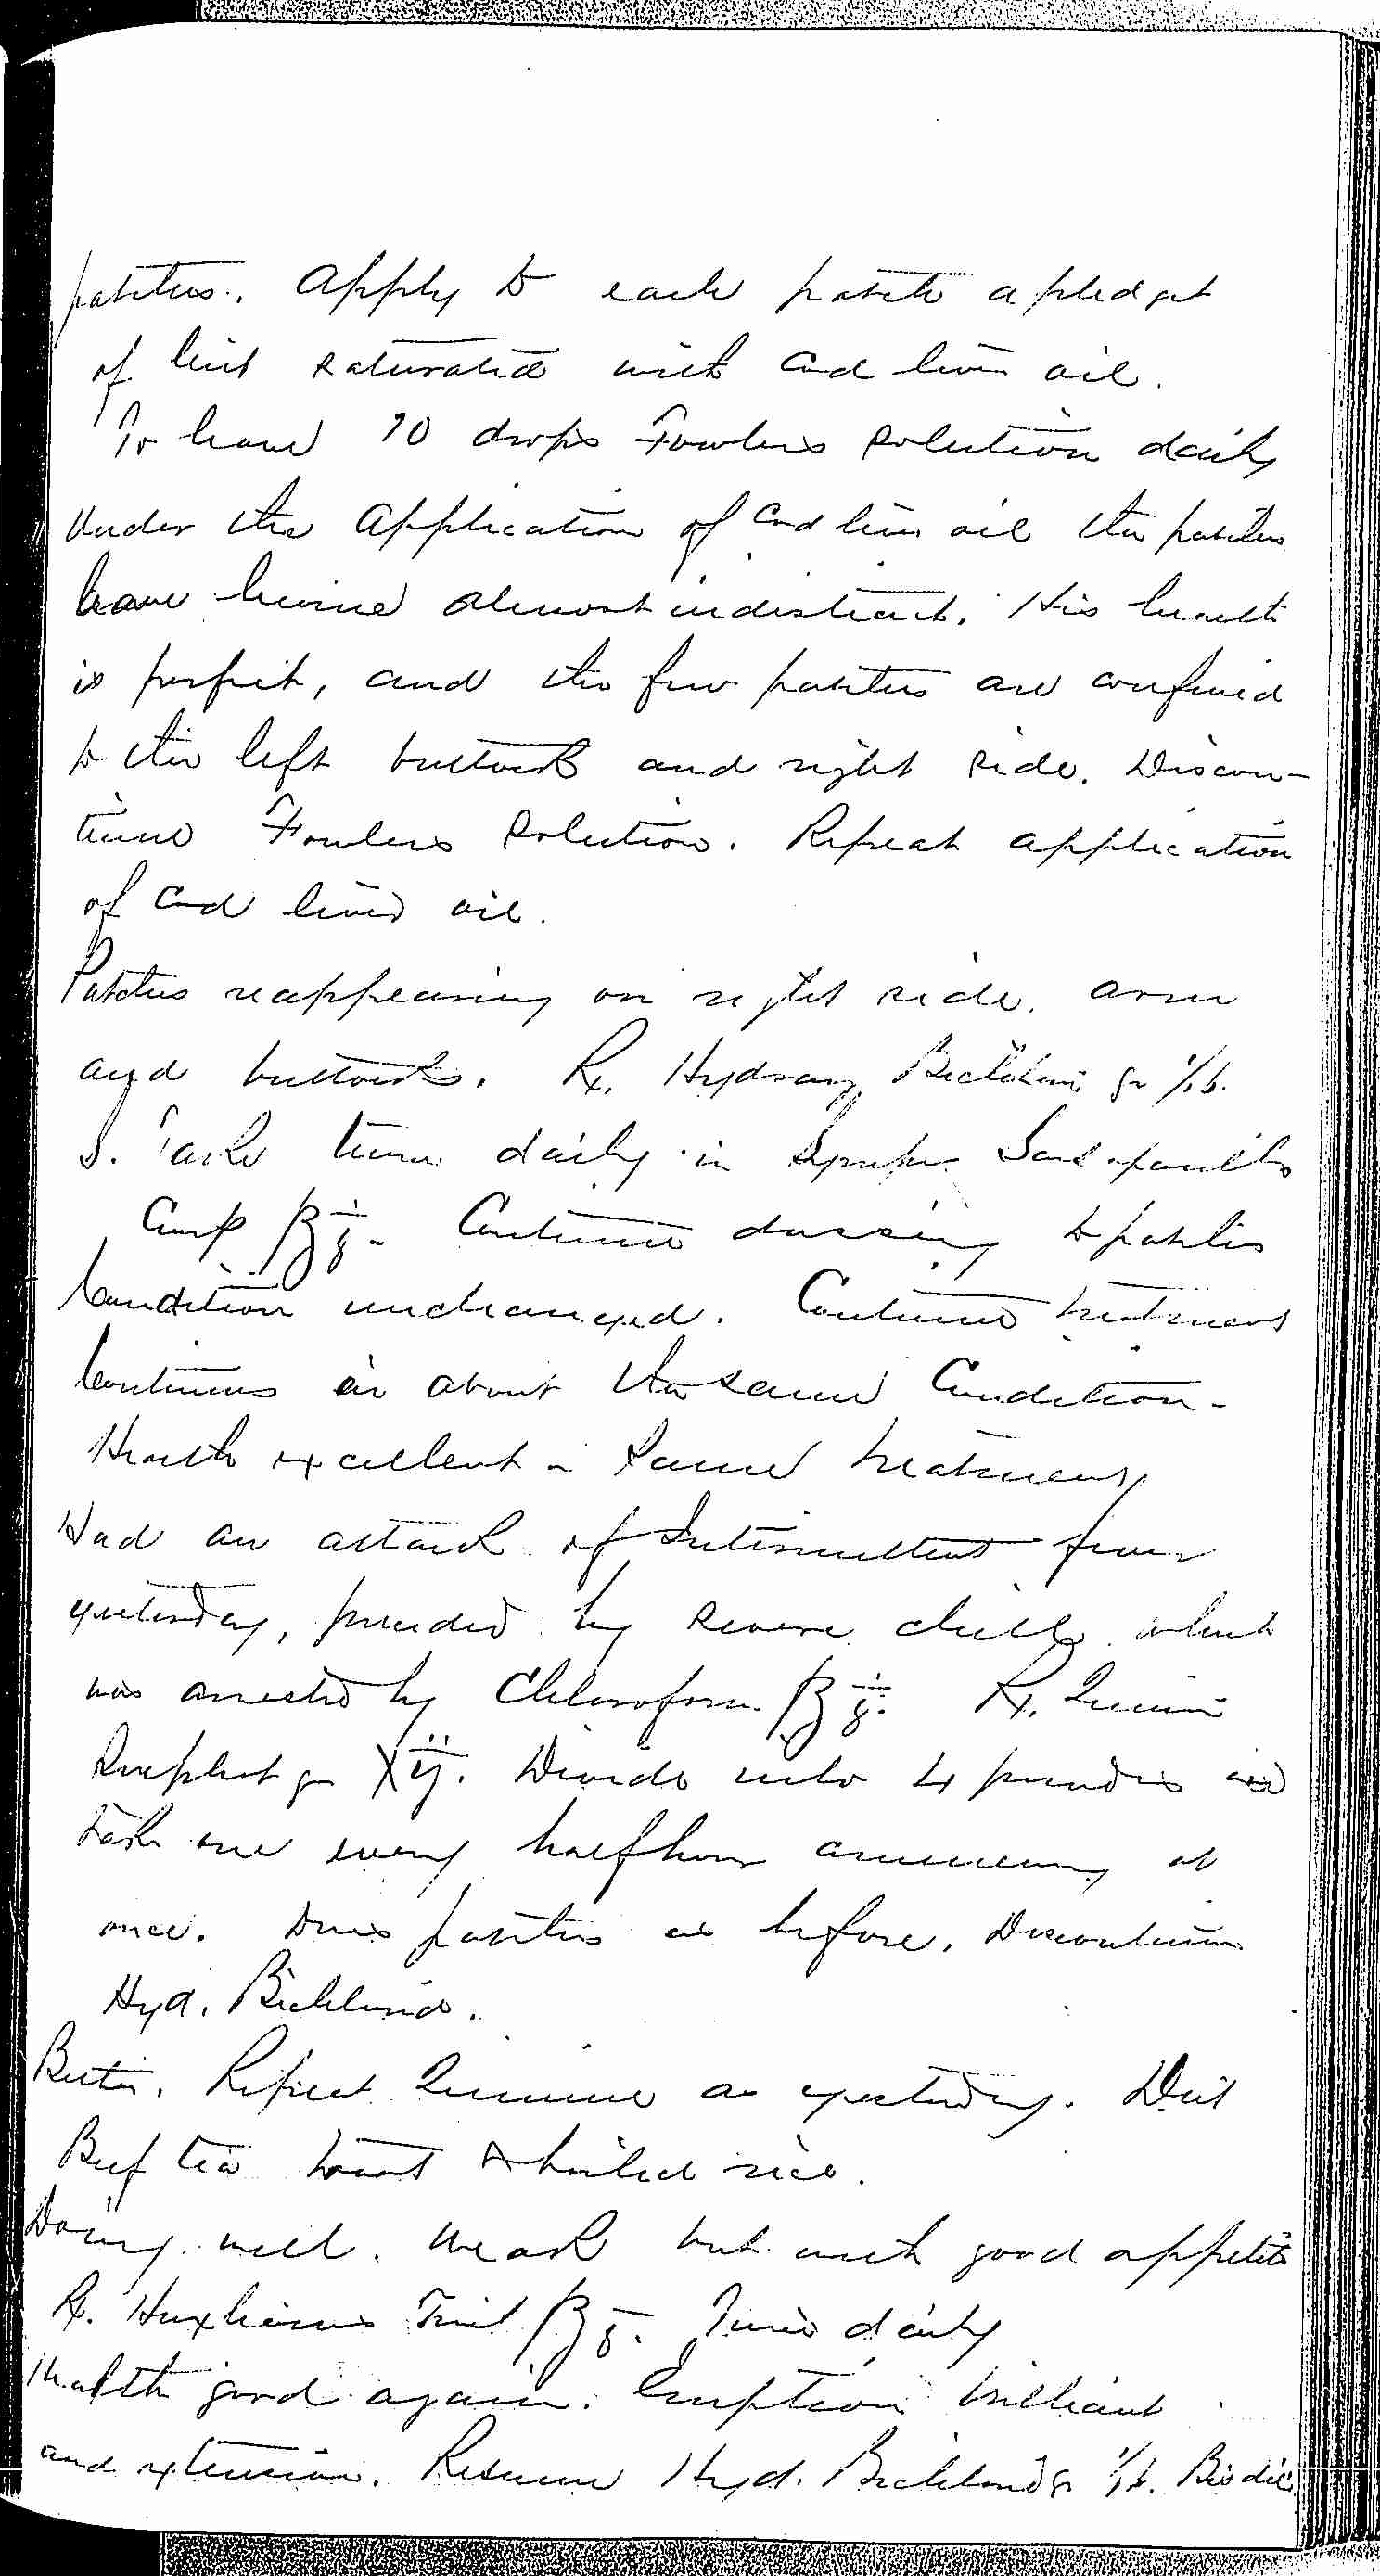 Entry for Edward Davis (page 3 of 6) in the log Hospital Tickets and Case Papers - Naval Hospital - Washington, D.C. - 1868-69